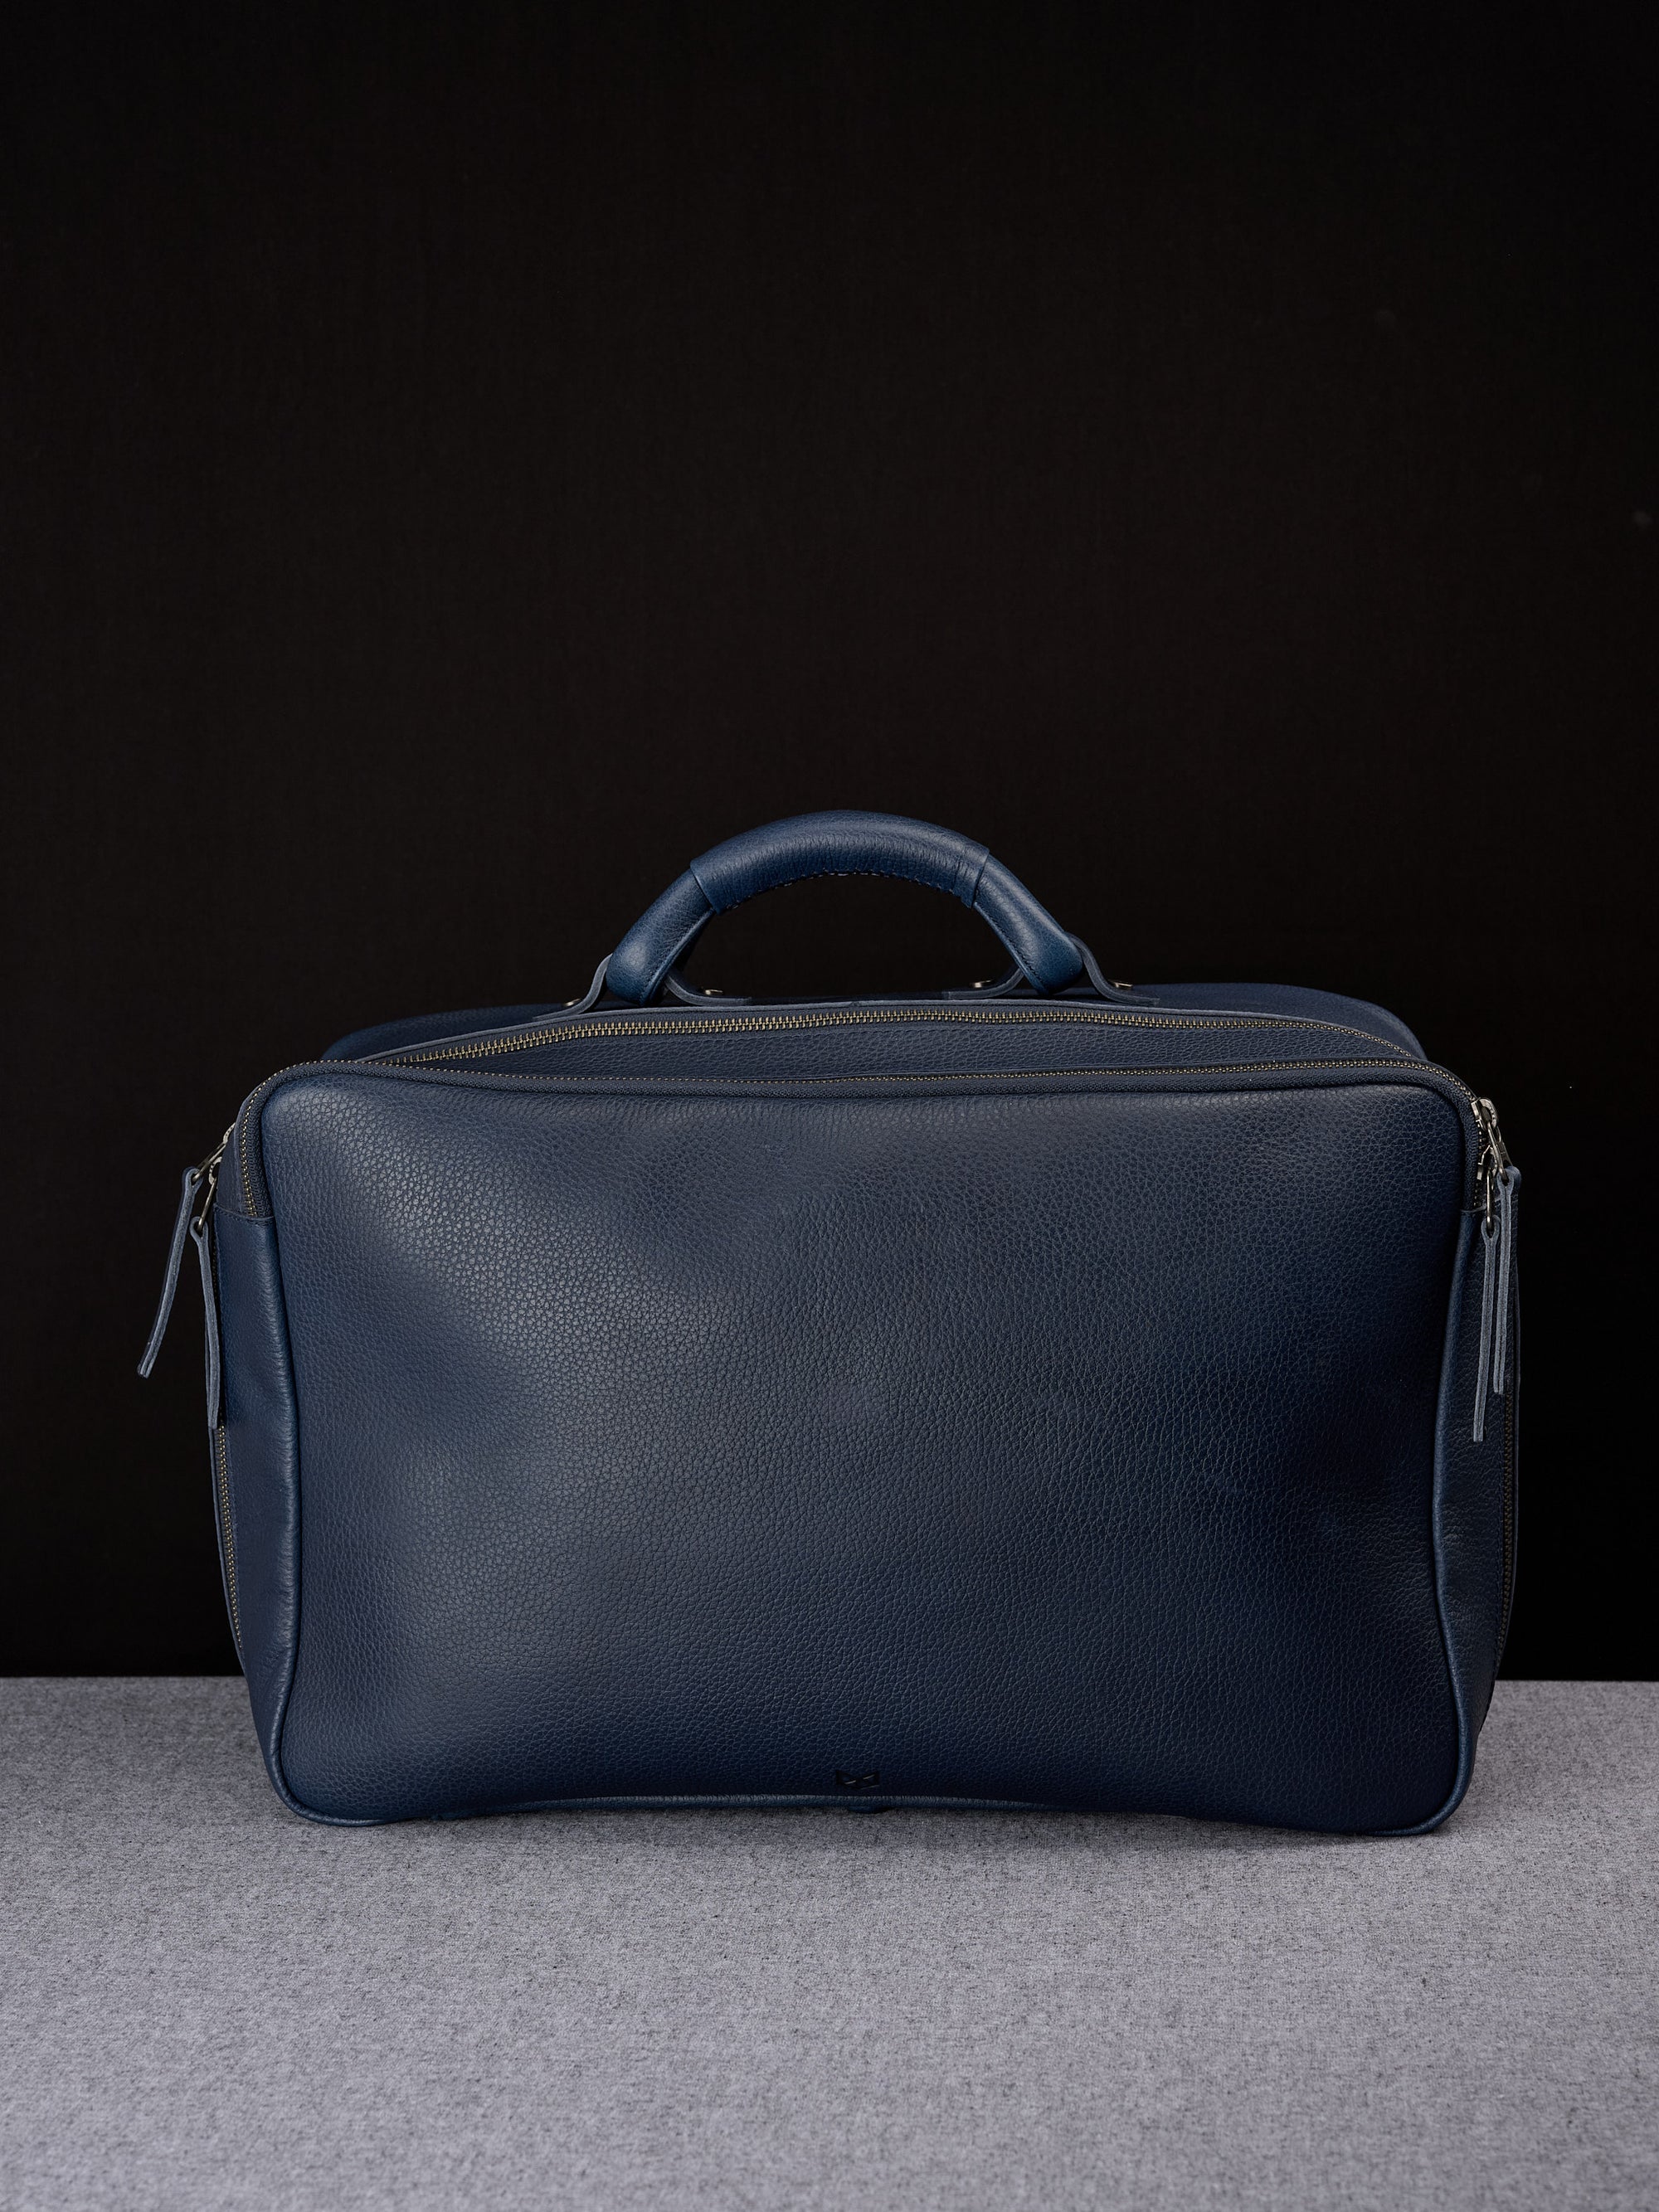 Weekend travel bag navy by Capra Leather